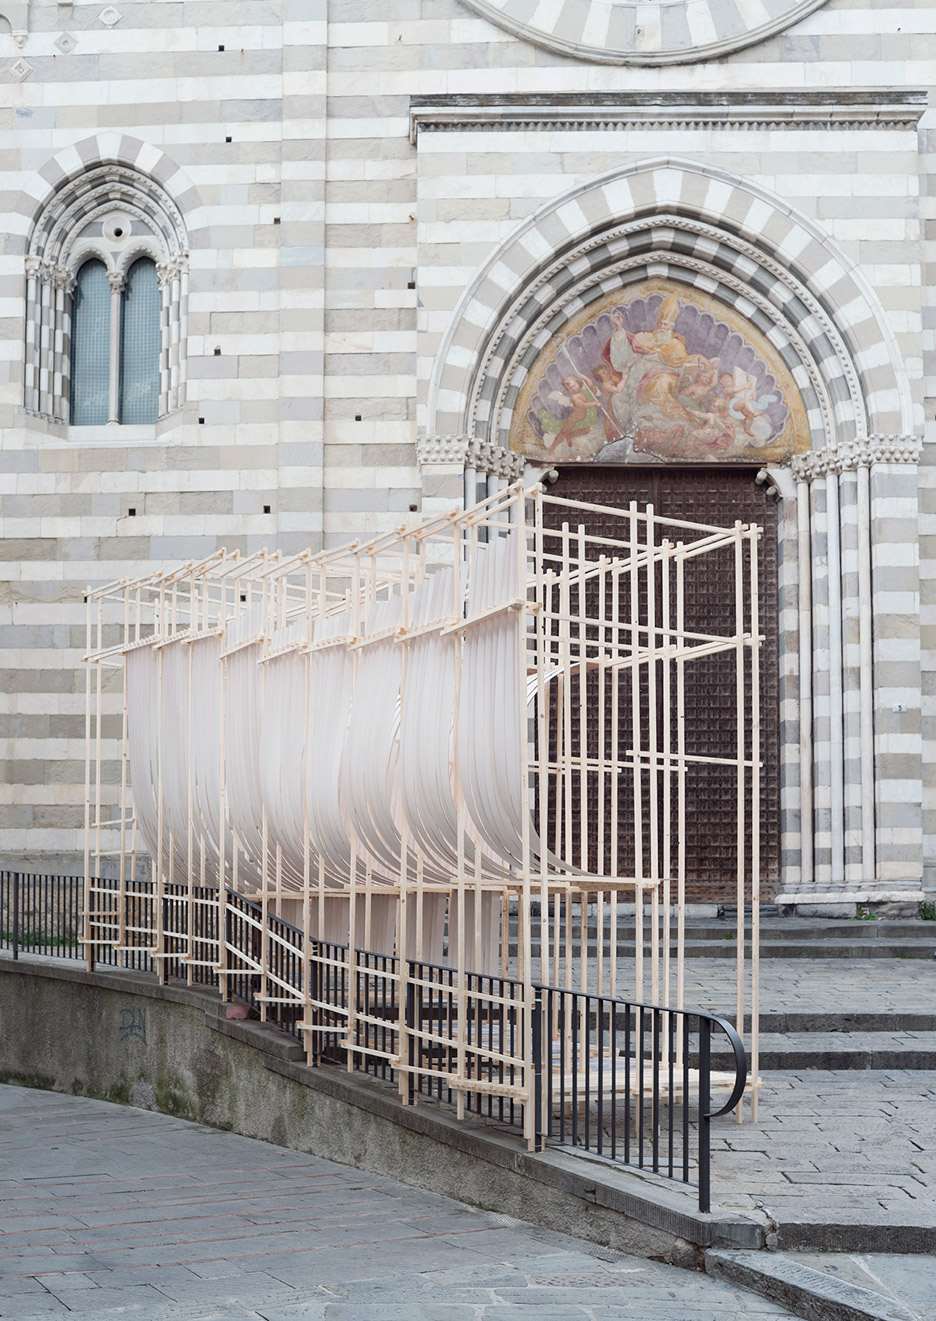 Bent installation for New Generations architecture festival